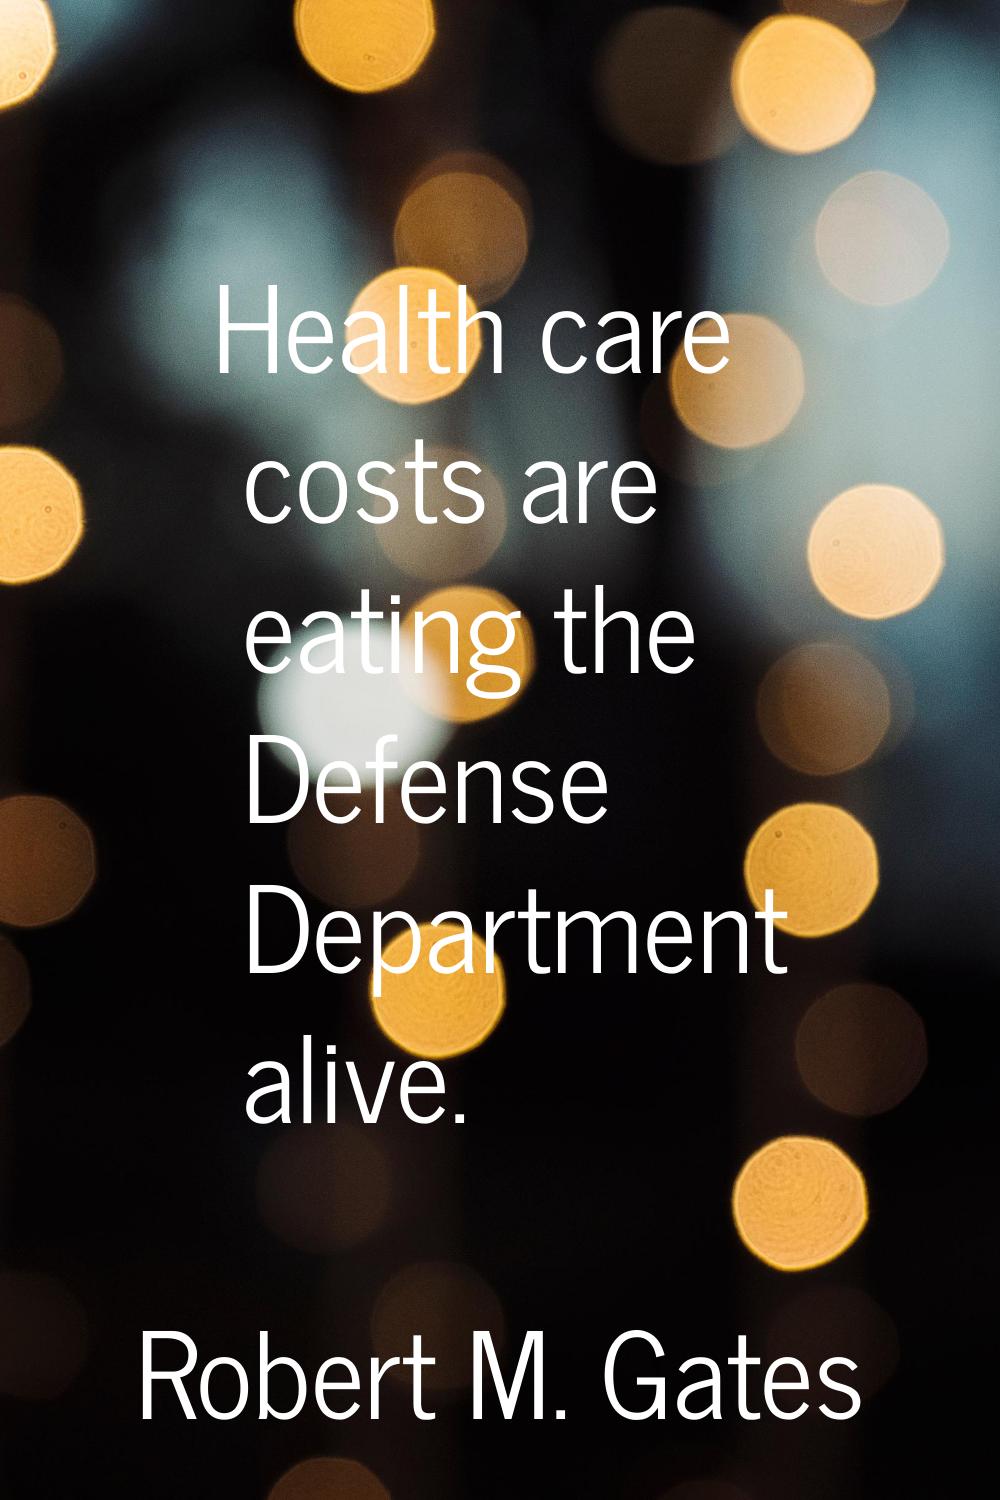 Health care costs are eating the Defense Department alive.